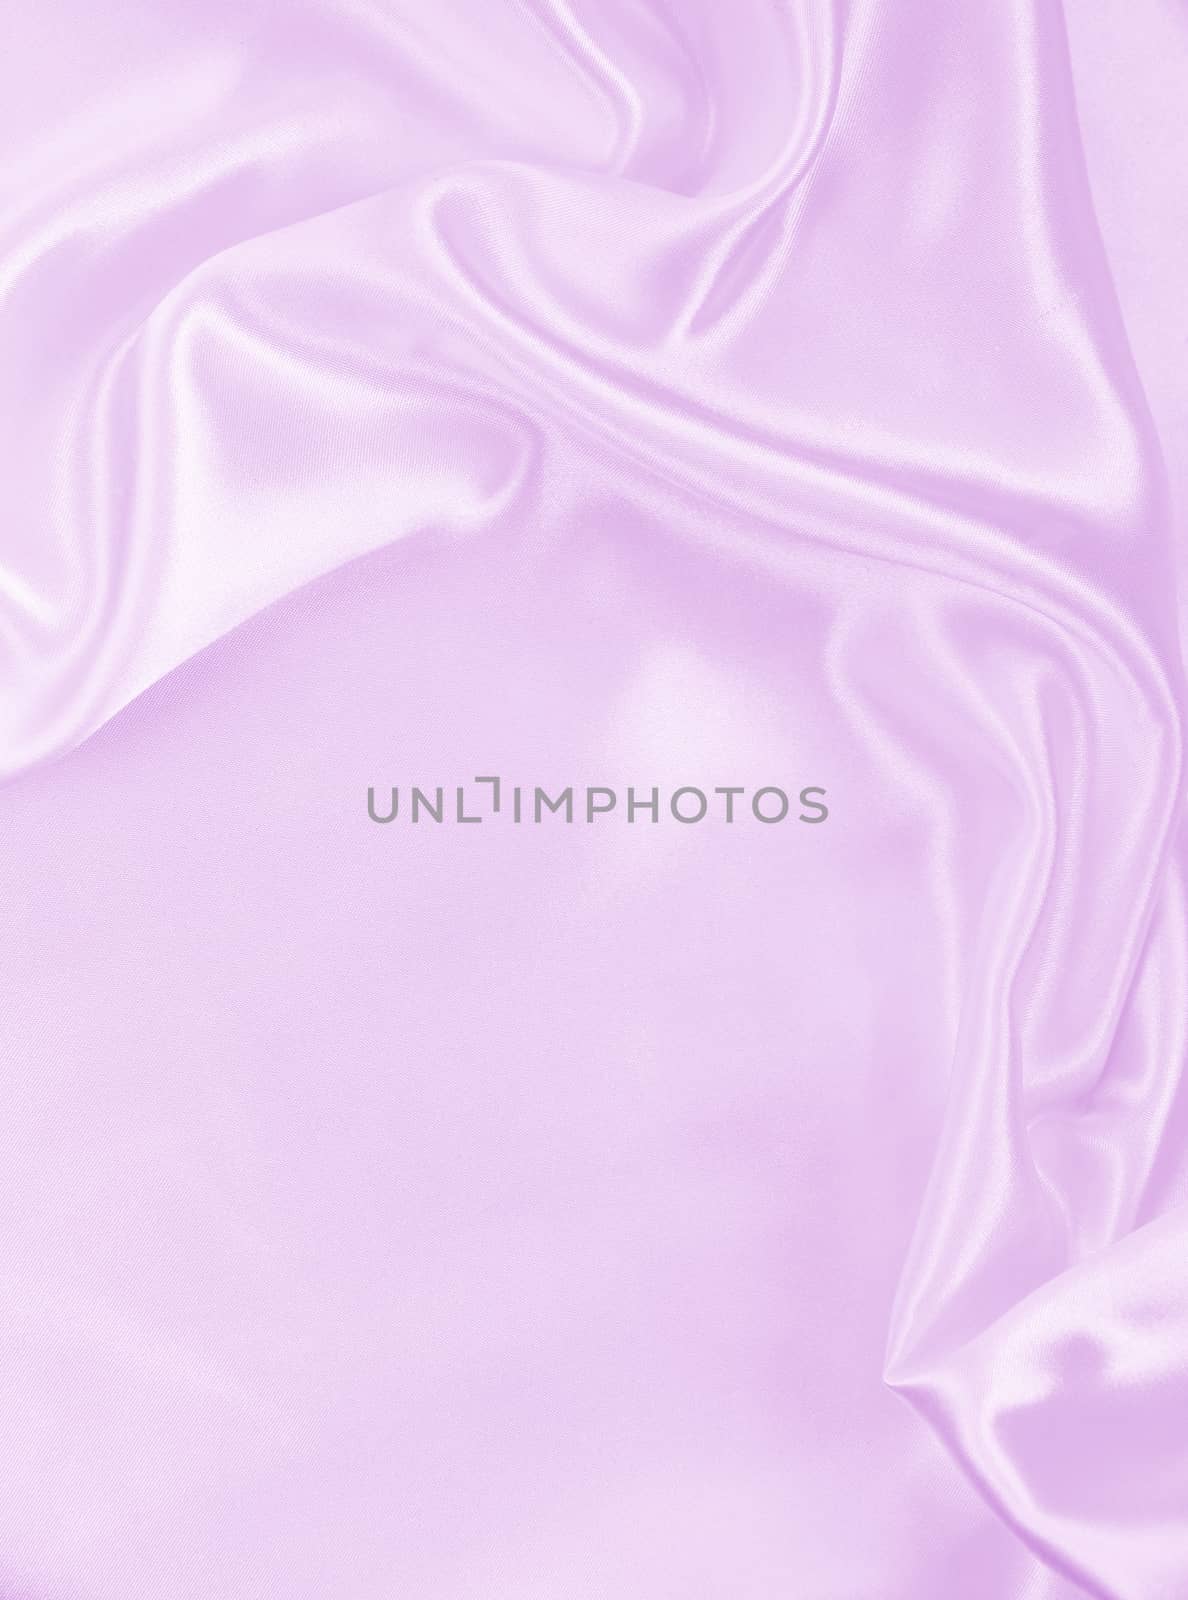 Smooth elegant lilac silk or satin texture can use as background 